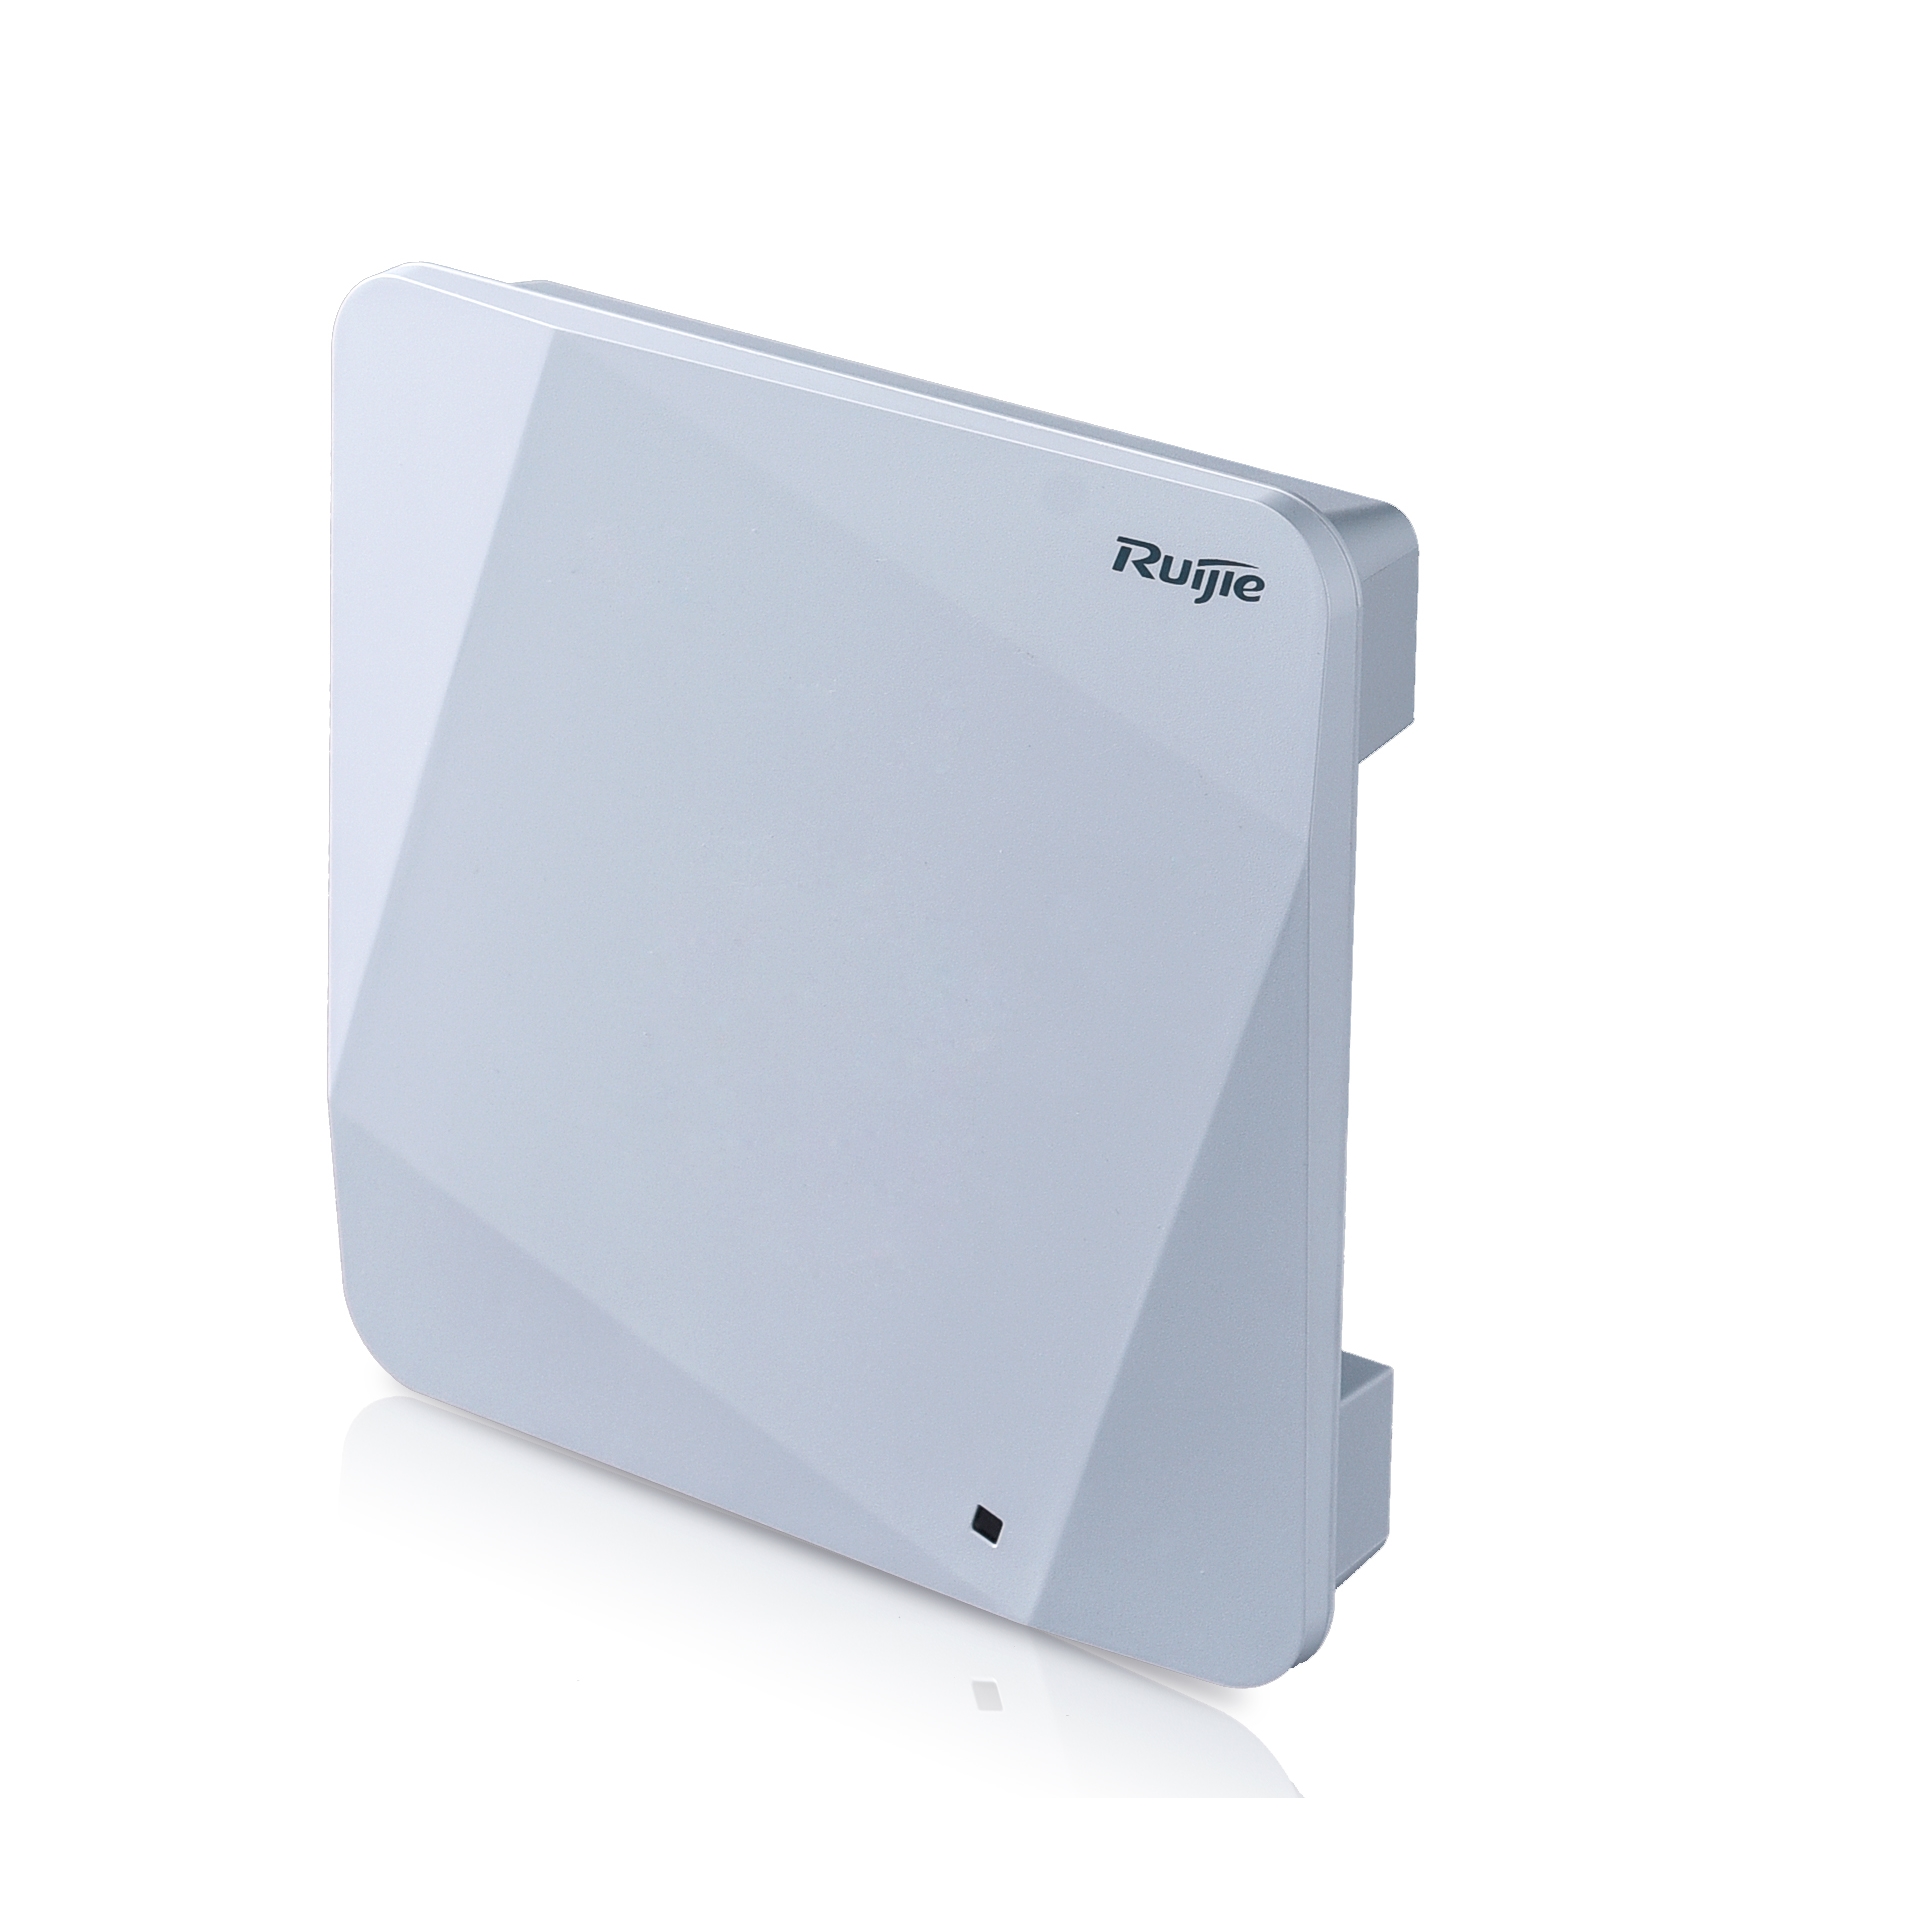 RUIJIE RG-AP710 1167MBPS 1PORT 2x2MIMO 2.4 GHZ & 5 GHZ INDOOR ACCESS POINT